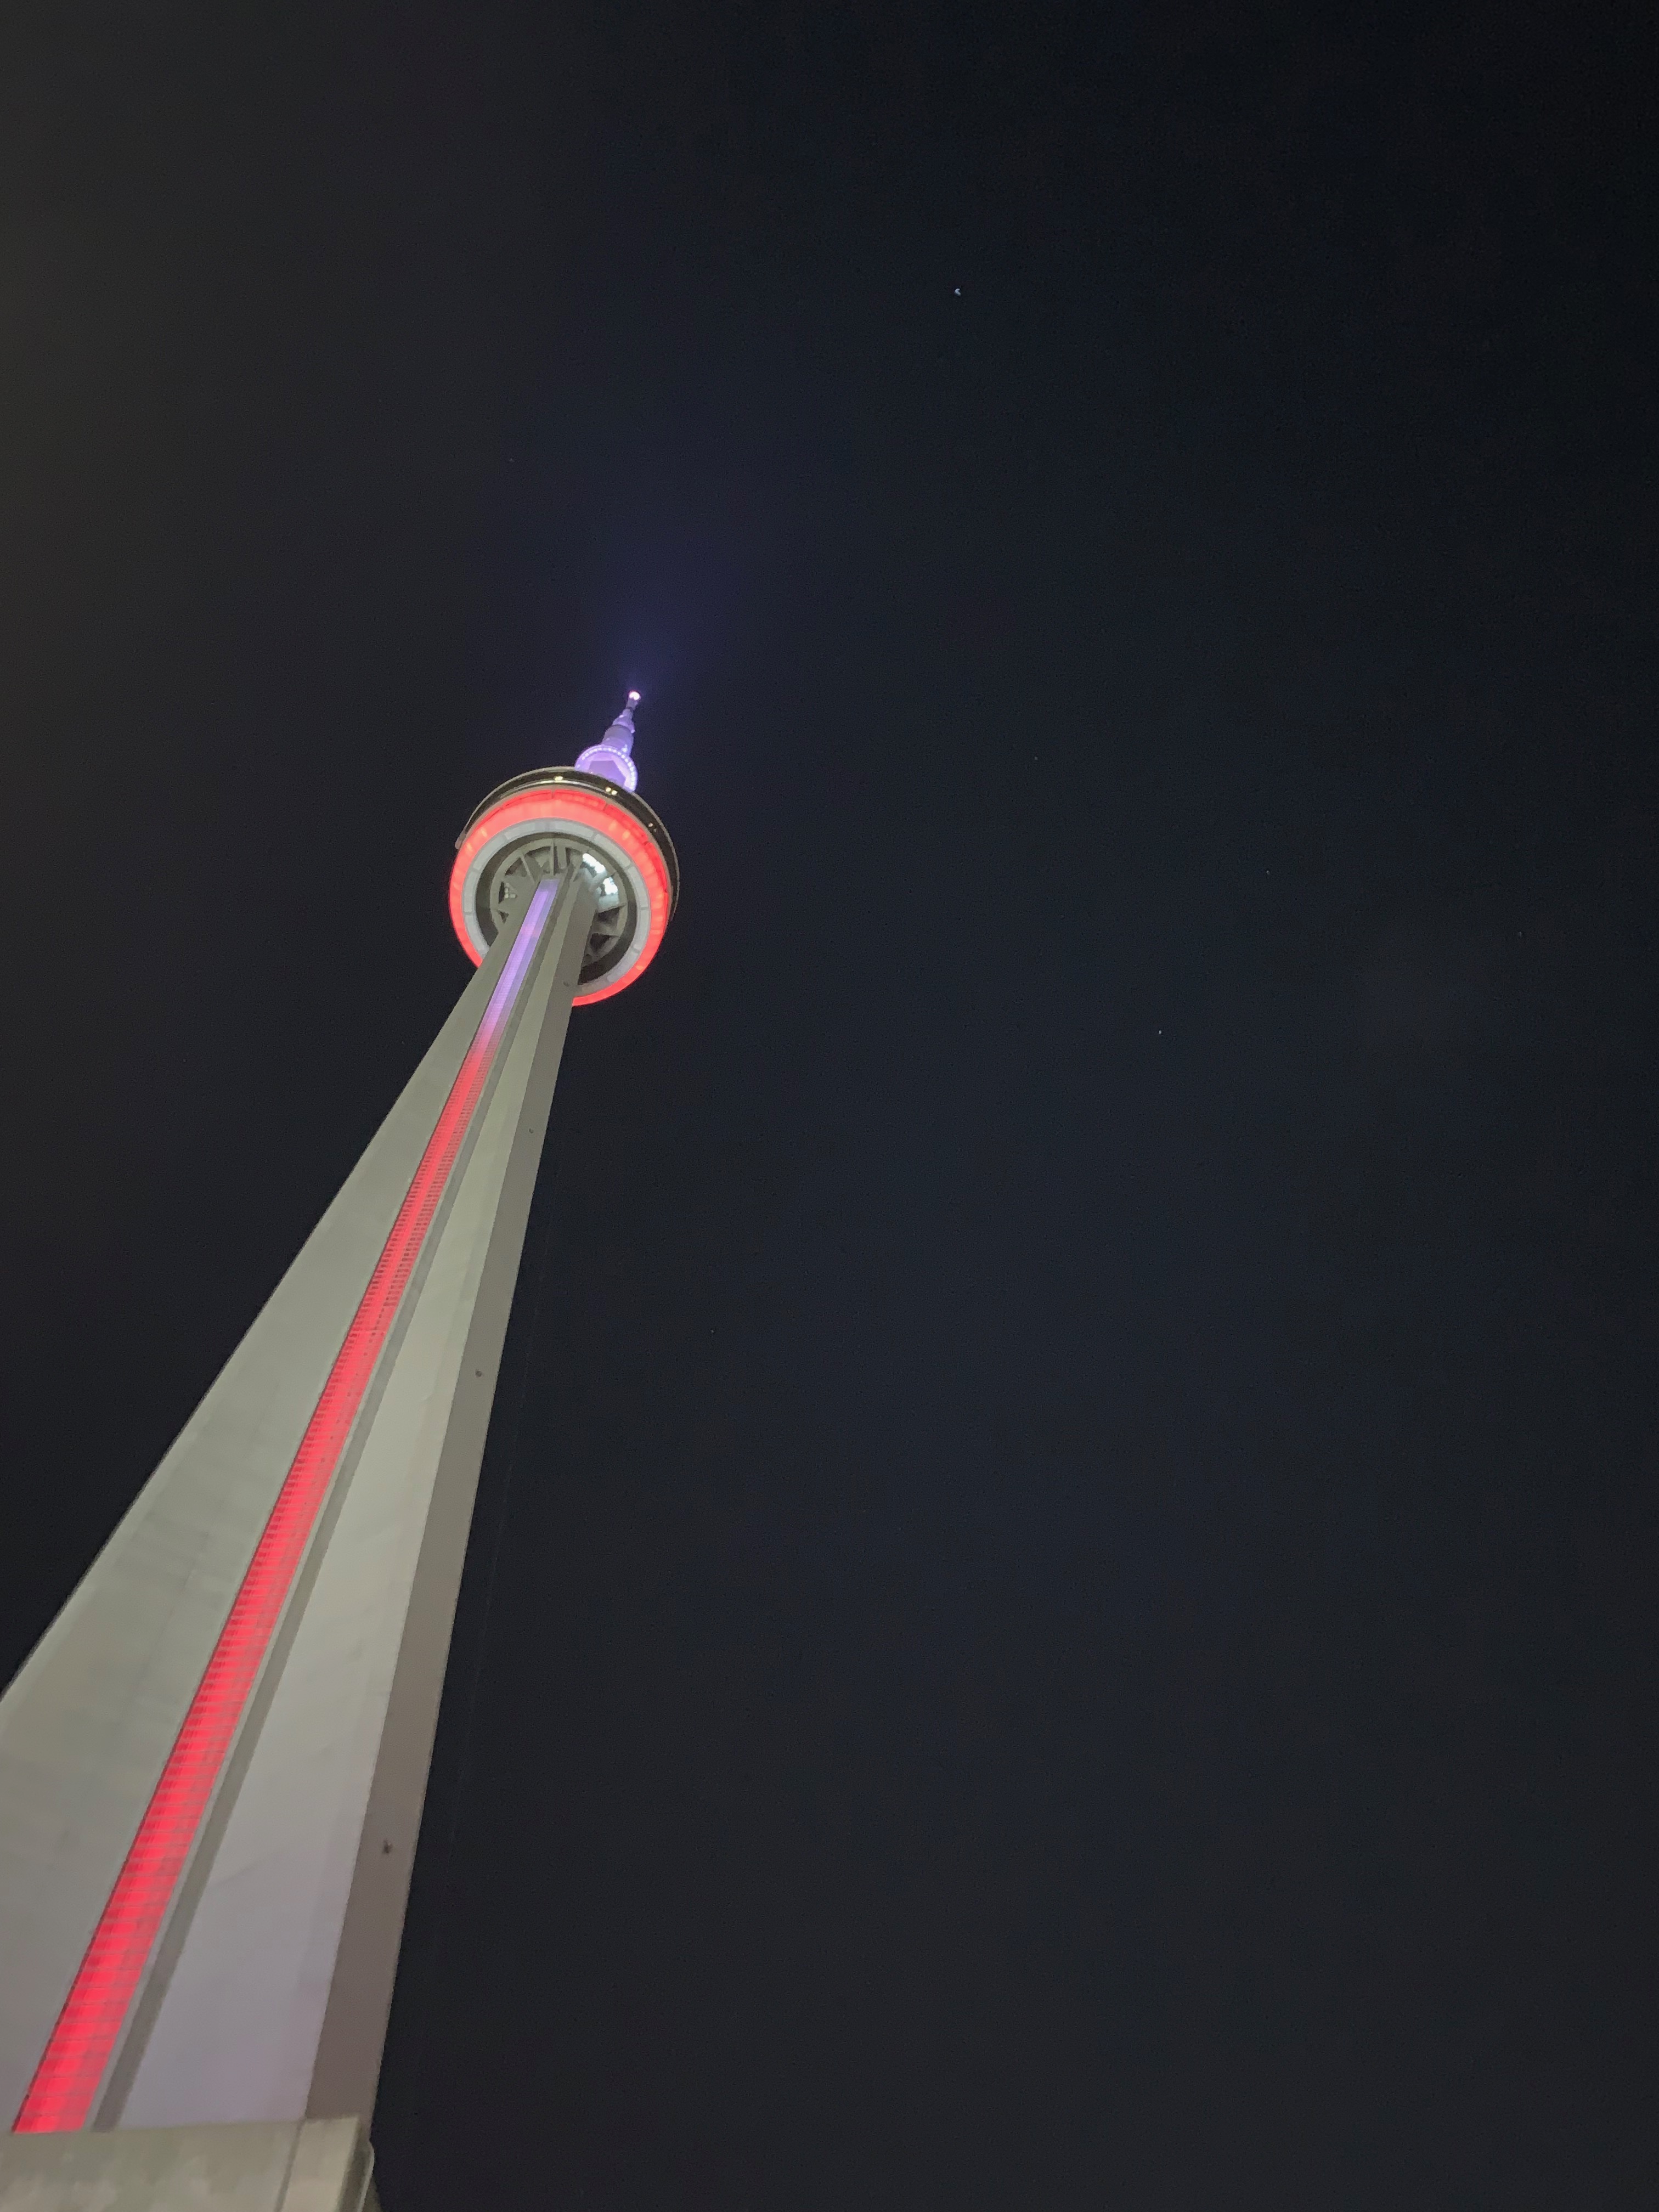 The CN Tower at Night